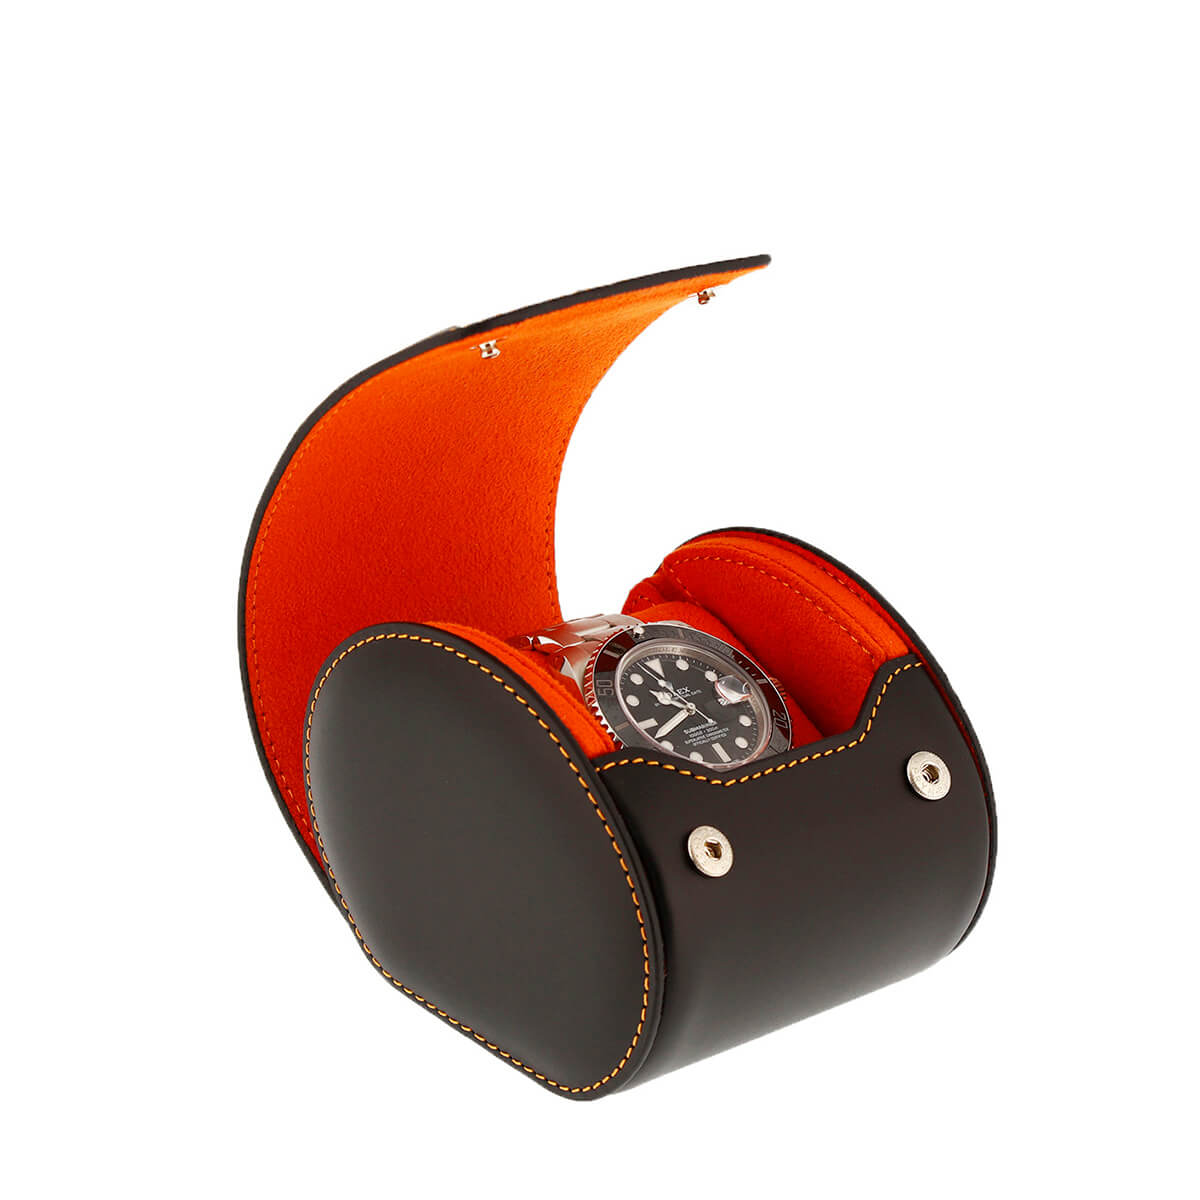 Single Watch Roll Case in Premium Black Nappa Leather with Orange Lining by Aevitas